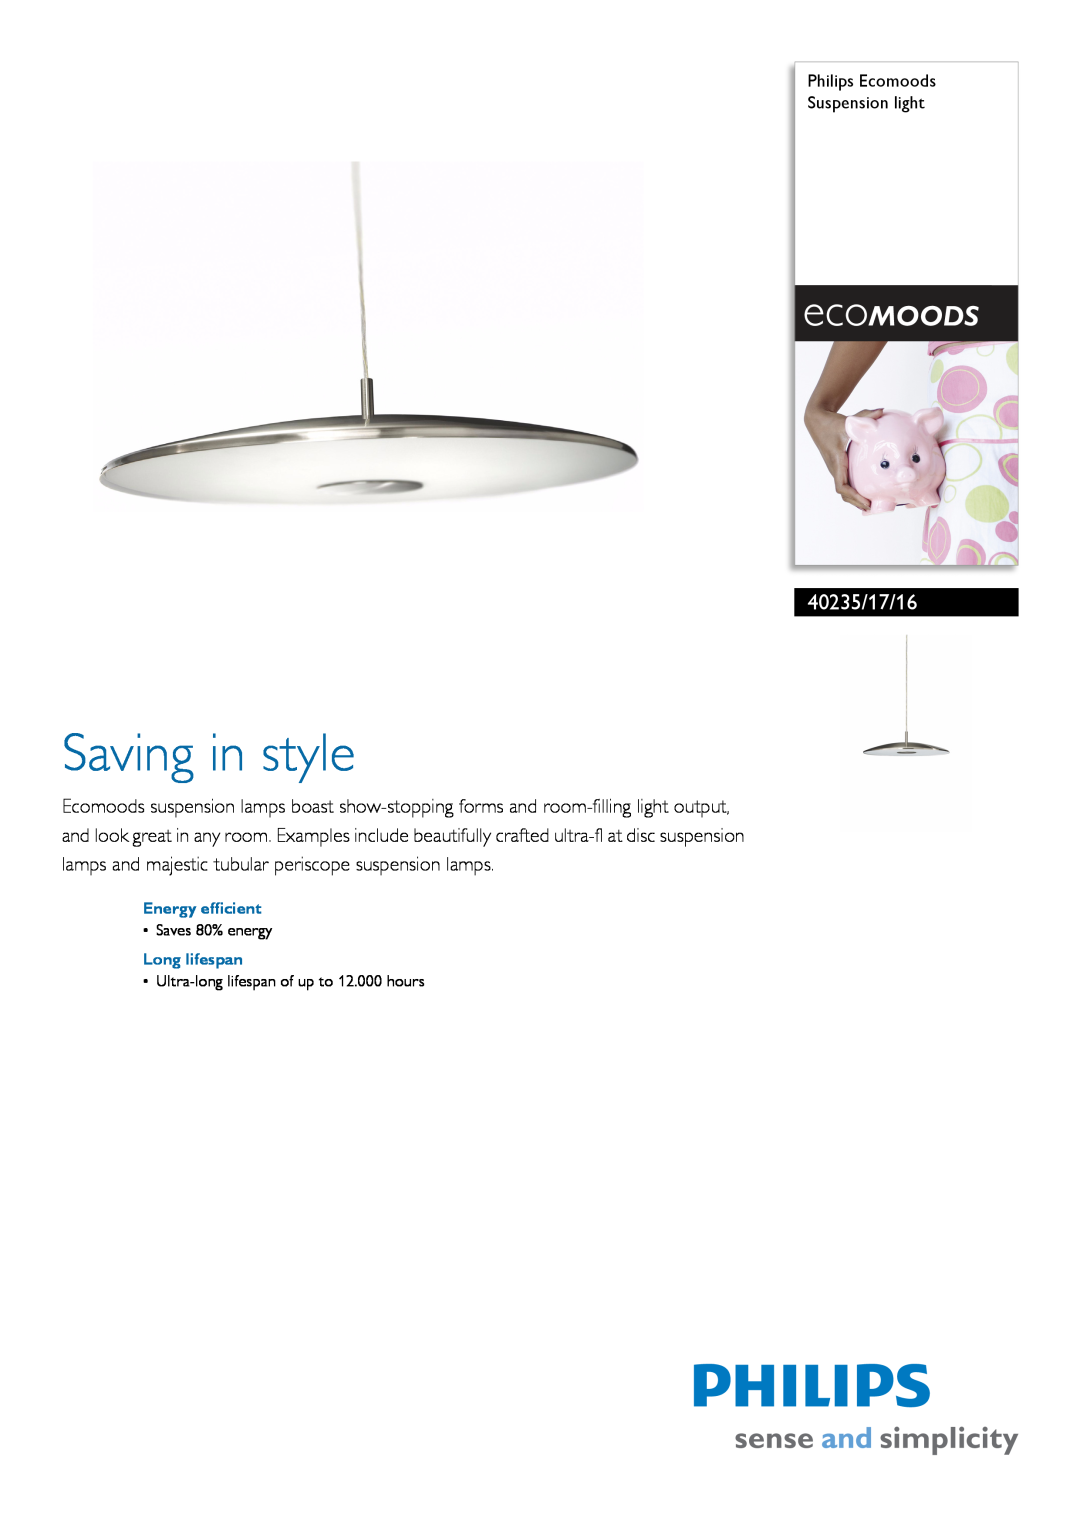 Philips 40235/17/16 manual Philips Ecomoods Suspension light, Energy efficient, Long lifespan, Saving in style 